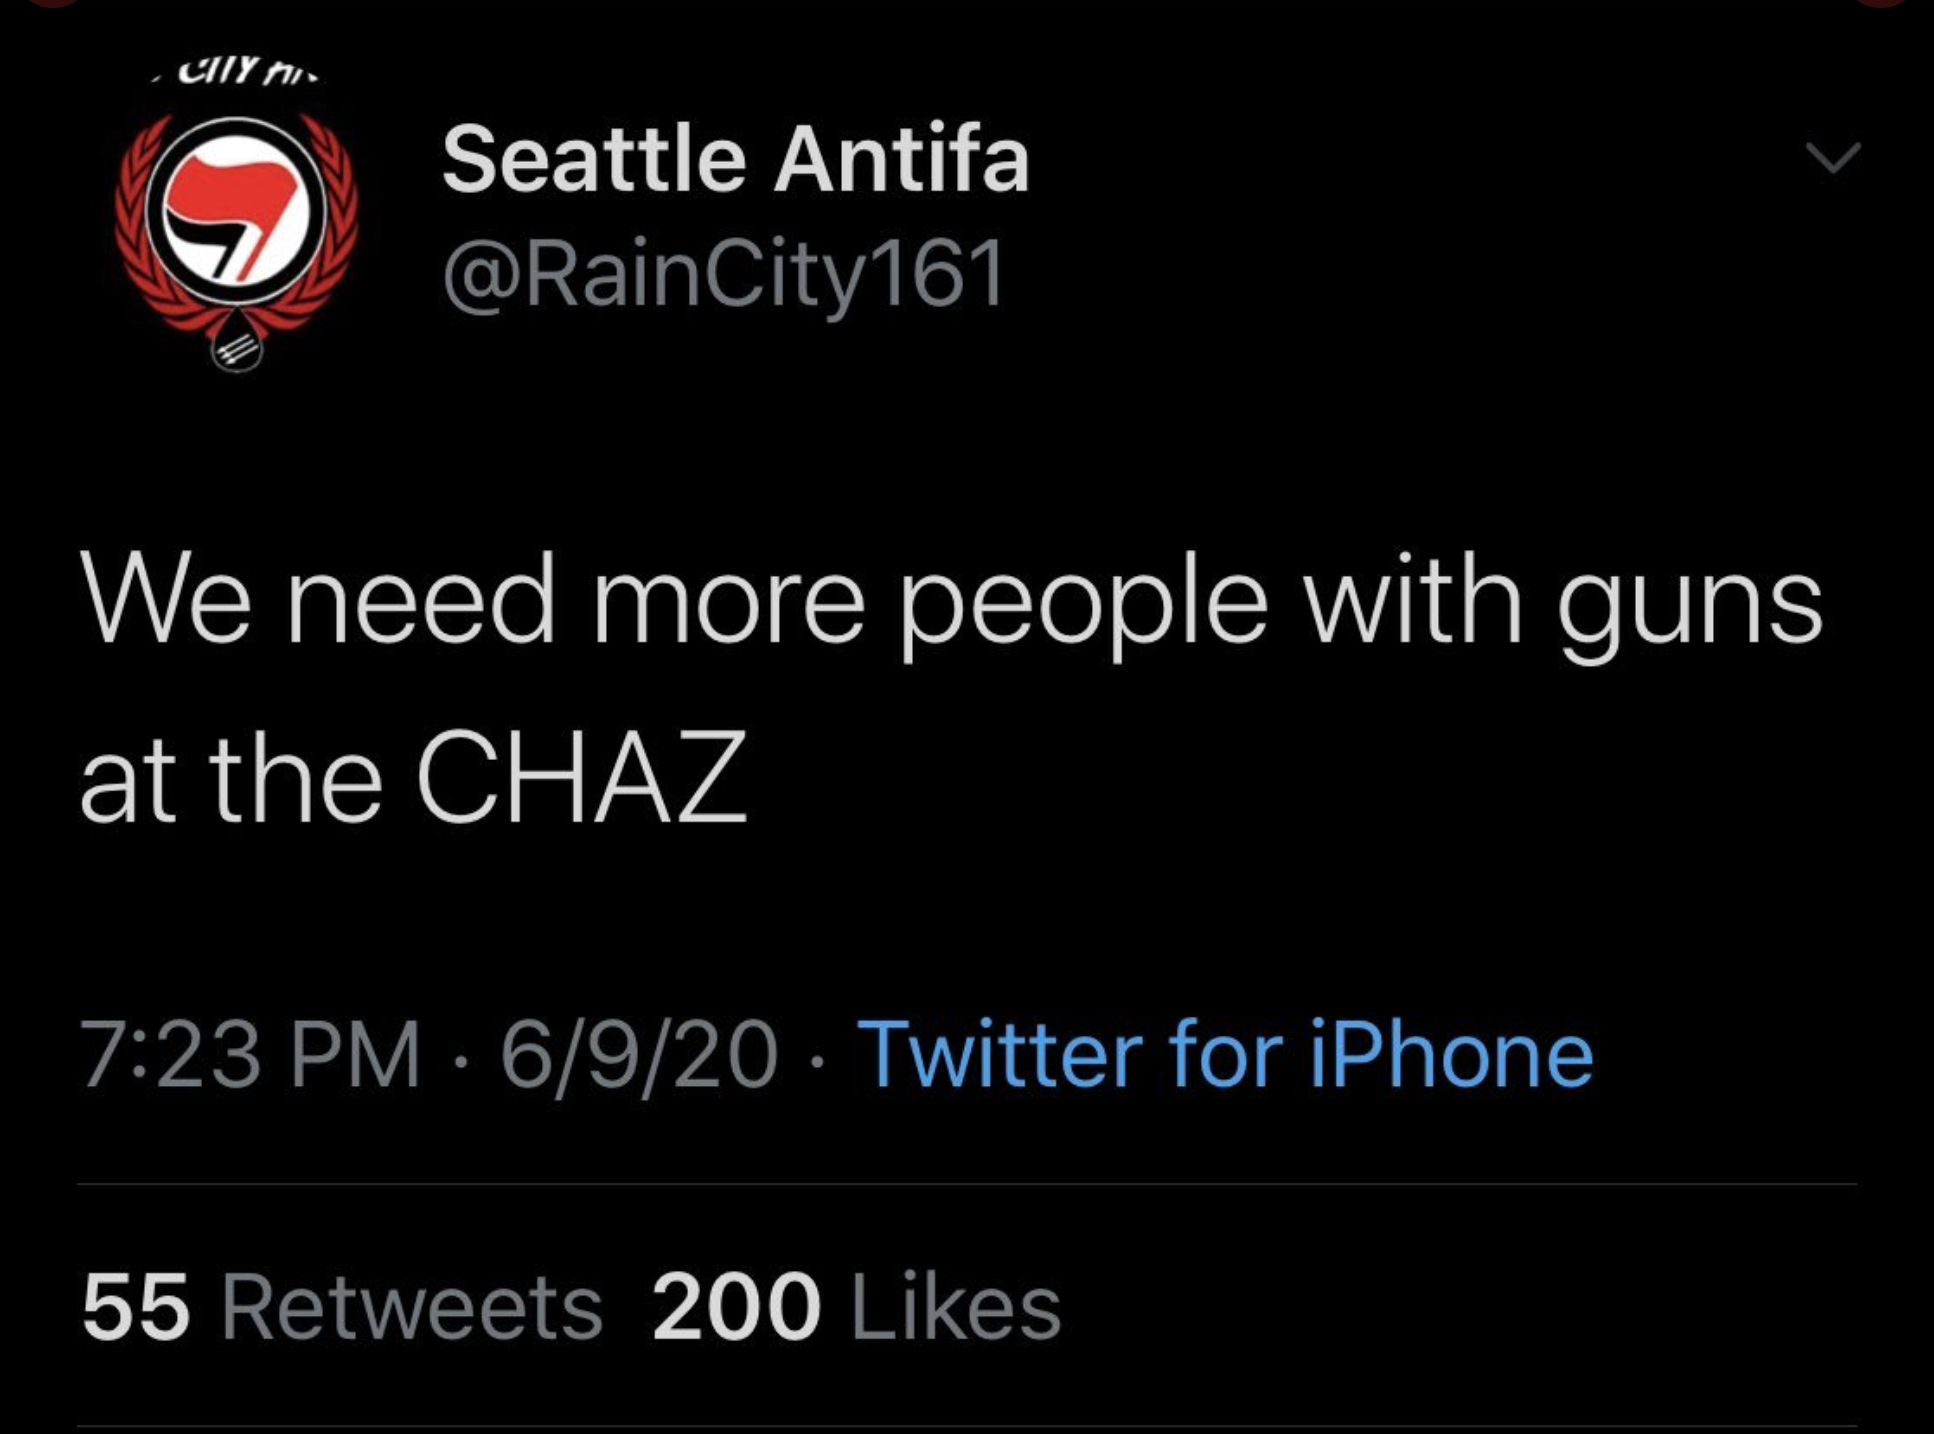 screenshot - Ciiy ni Seattle Antifa We need more people with guns at the Chaz 6920 Twitter for iPhone 55 200